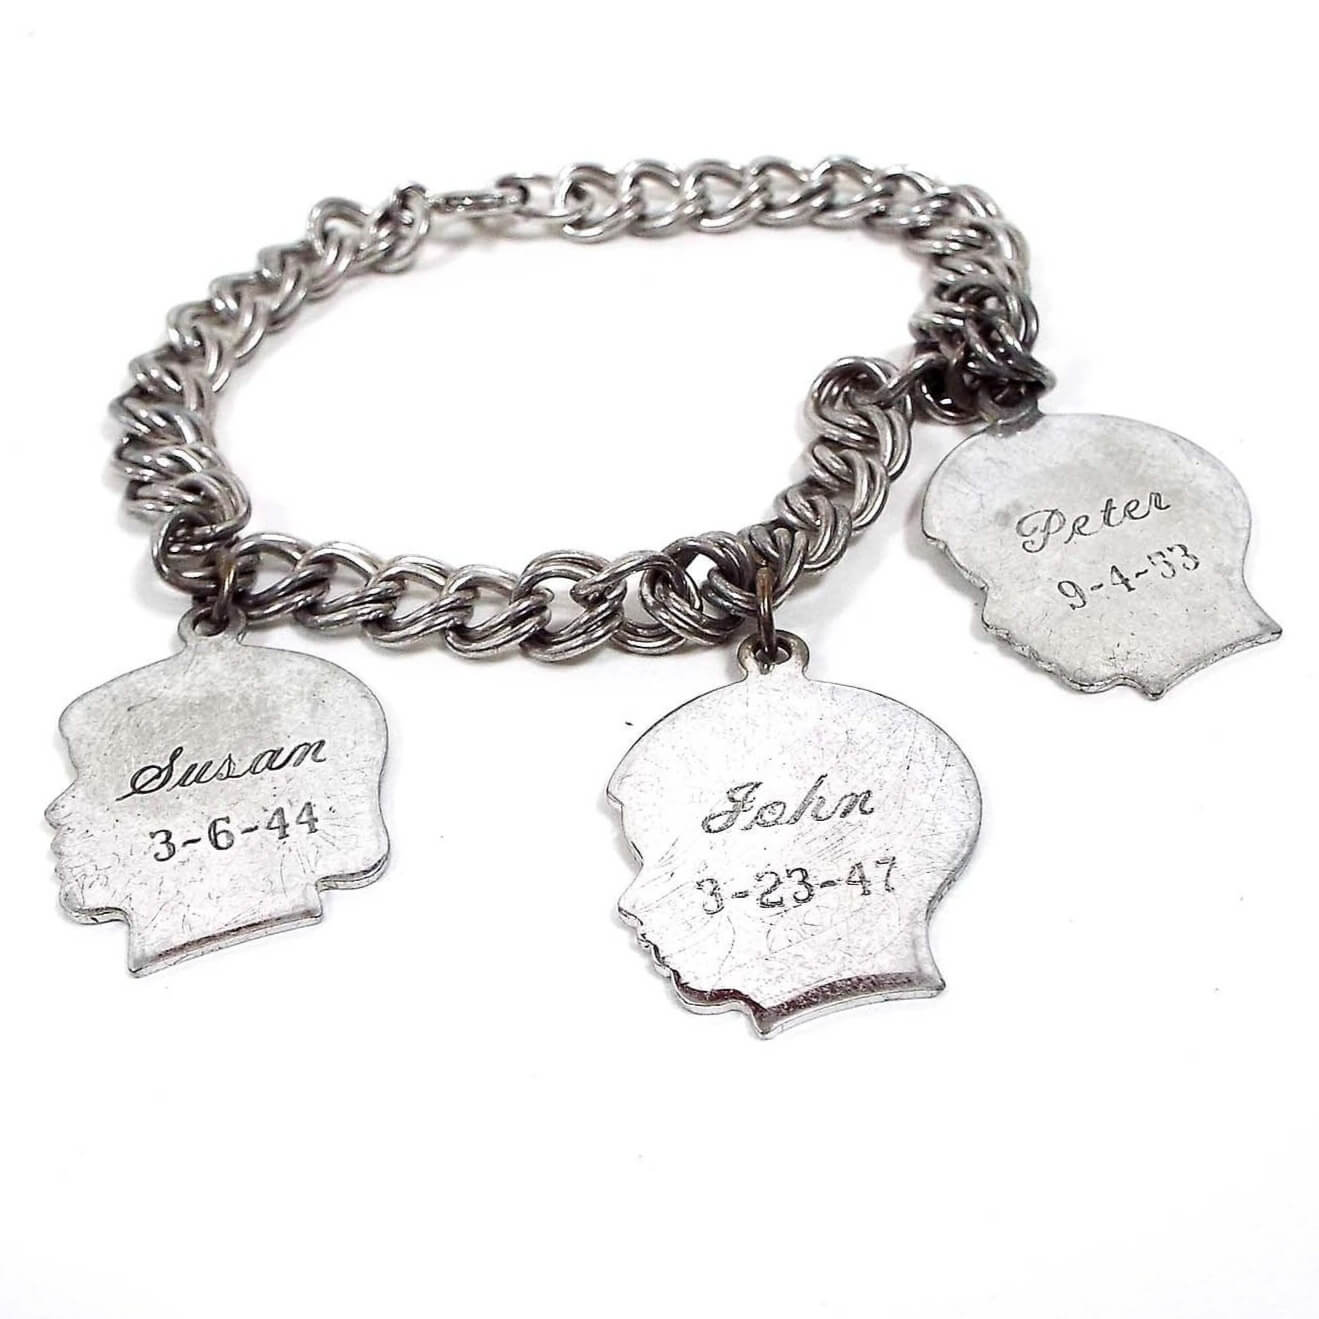 Front view of the Mid Century vintage sterling silver charm bracelet. It is silver tone in color with double link curb chain. There are three head shaped charms. Two are boy shaped and one girl. They have names and birthdates of Susan 3-6-44, John 3-23-47, and Peter 9-4-53. 